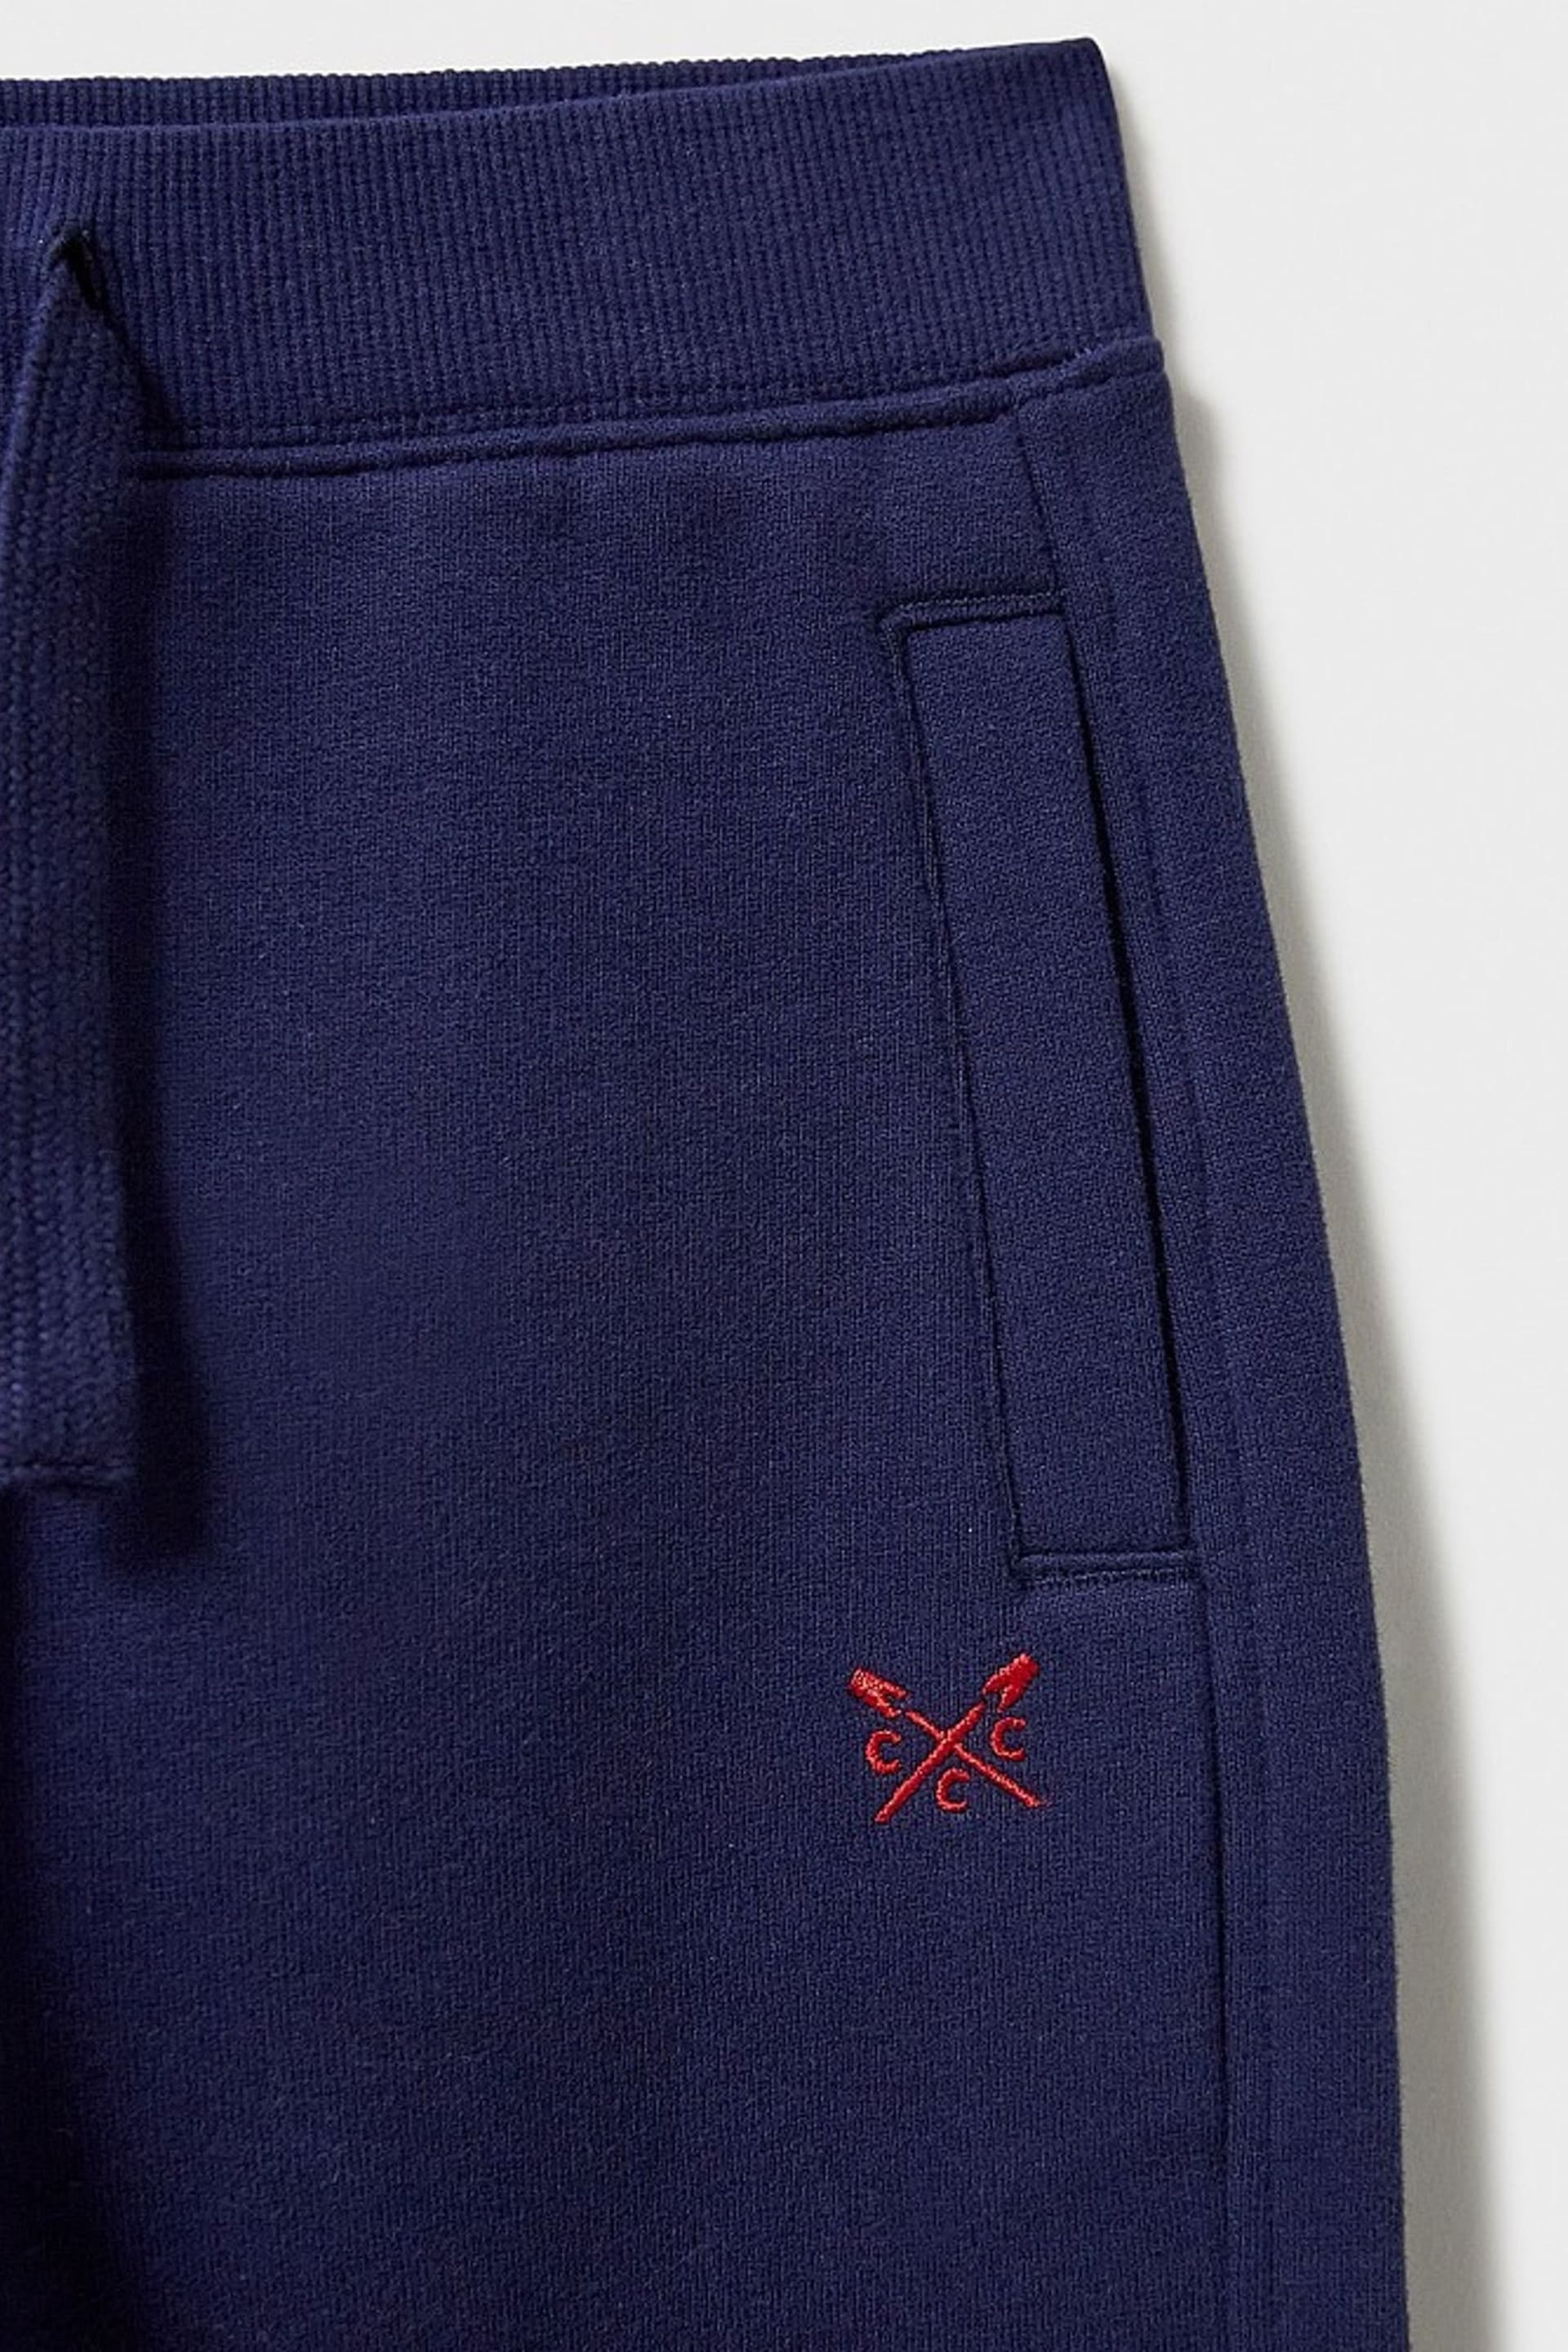 Crew Clothing Crossed Oars Joggers - Image 3 of 3